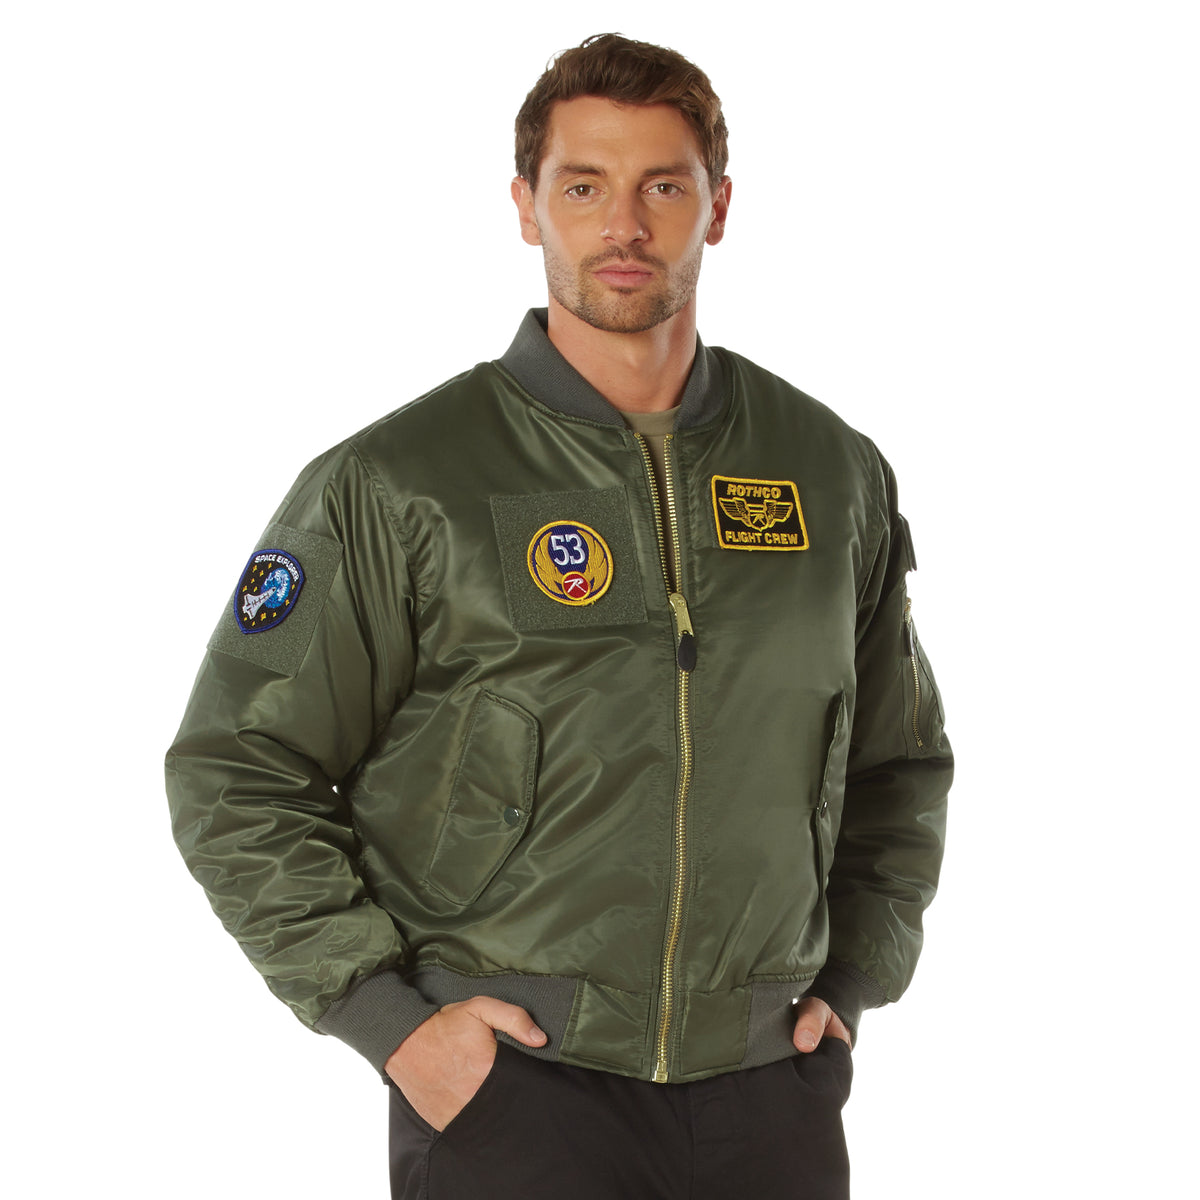 MA-1 Flight Jacket with Patches - Sage Green